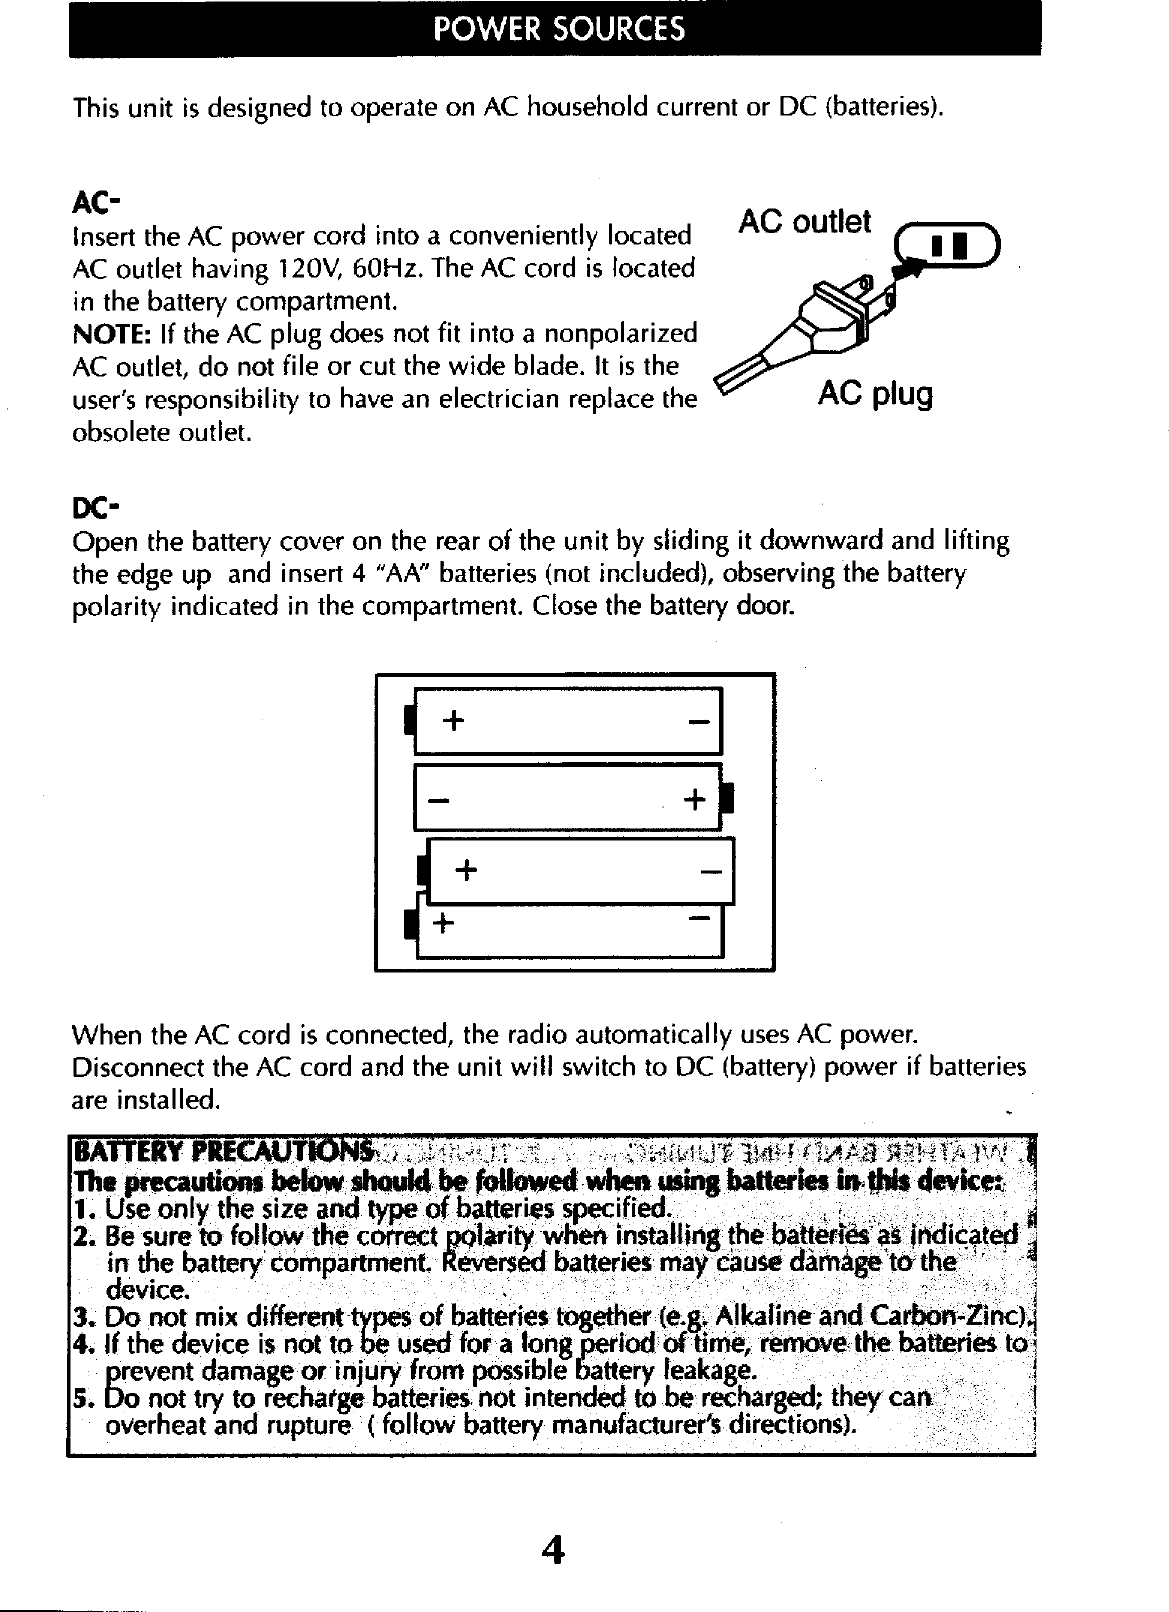 Page 5 of 9 - Emerson  File